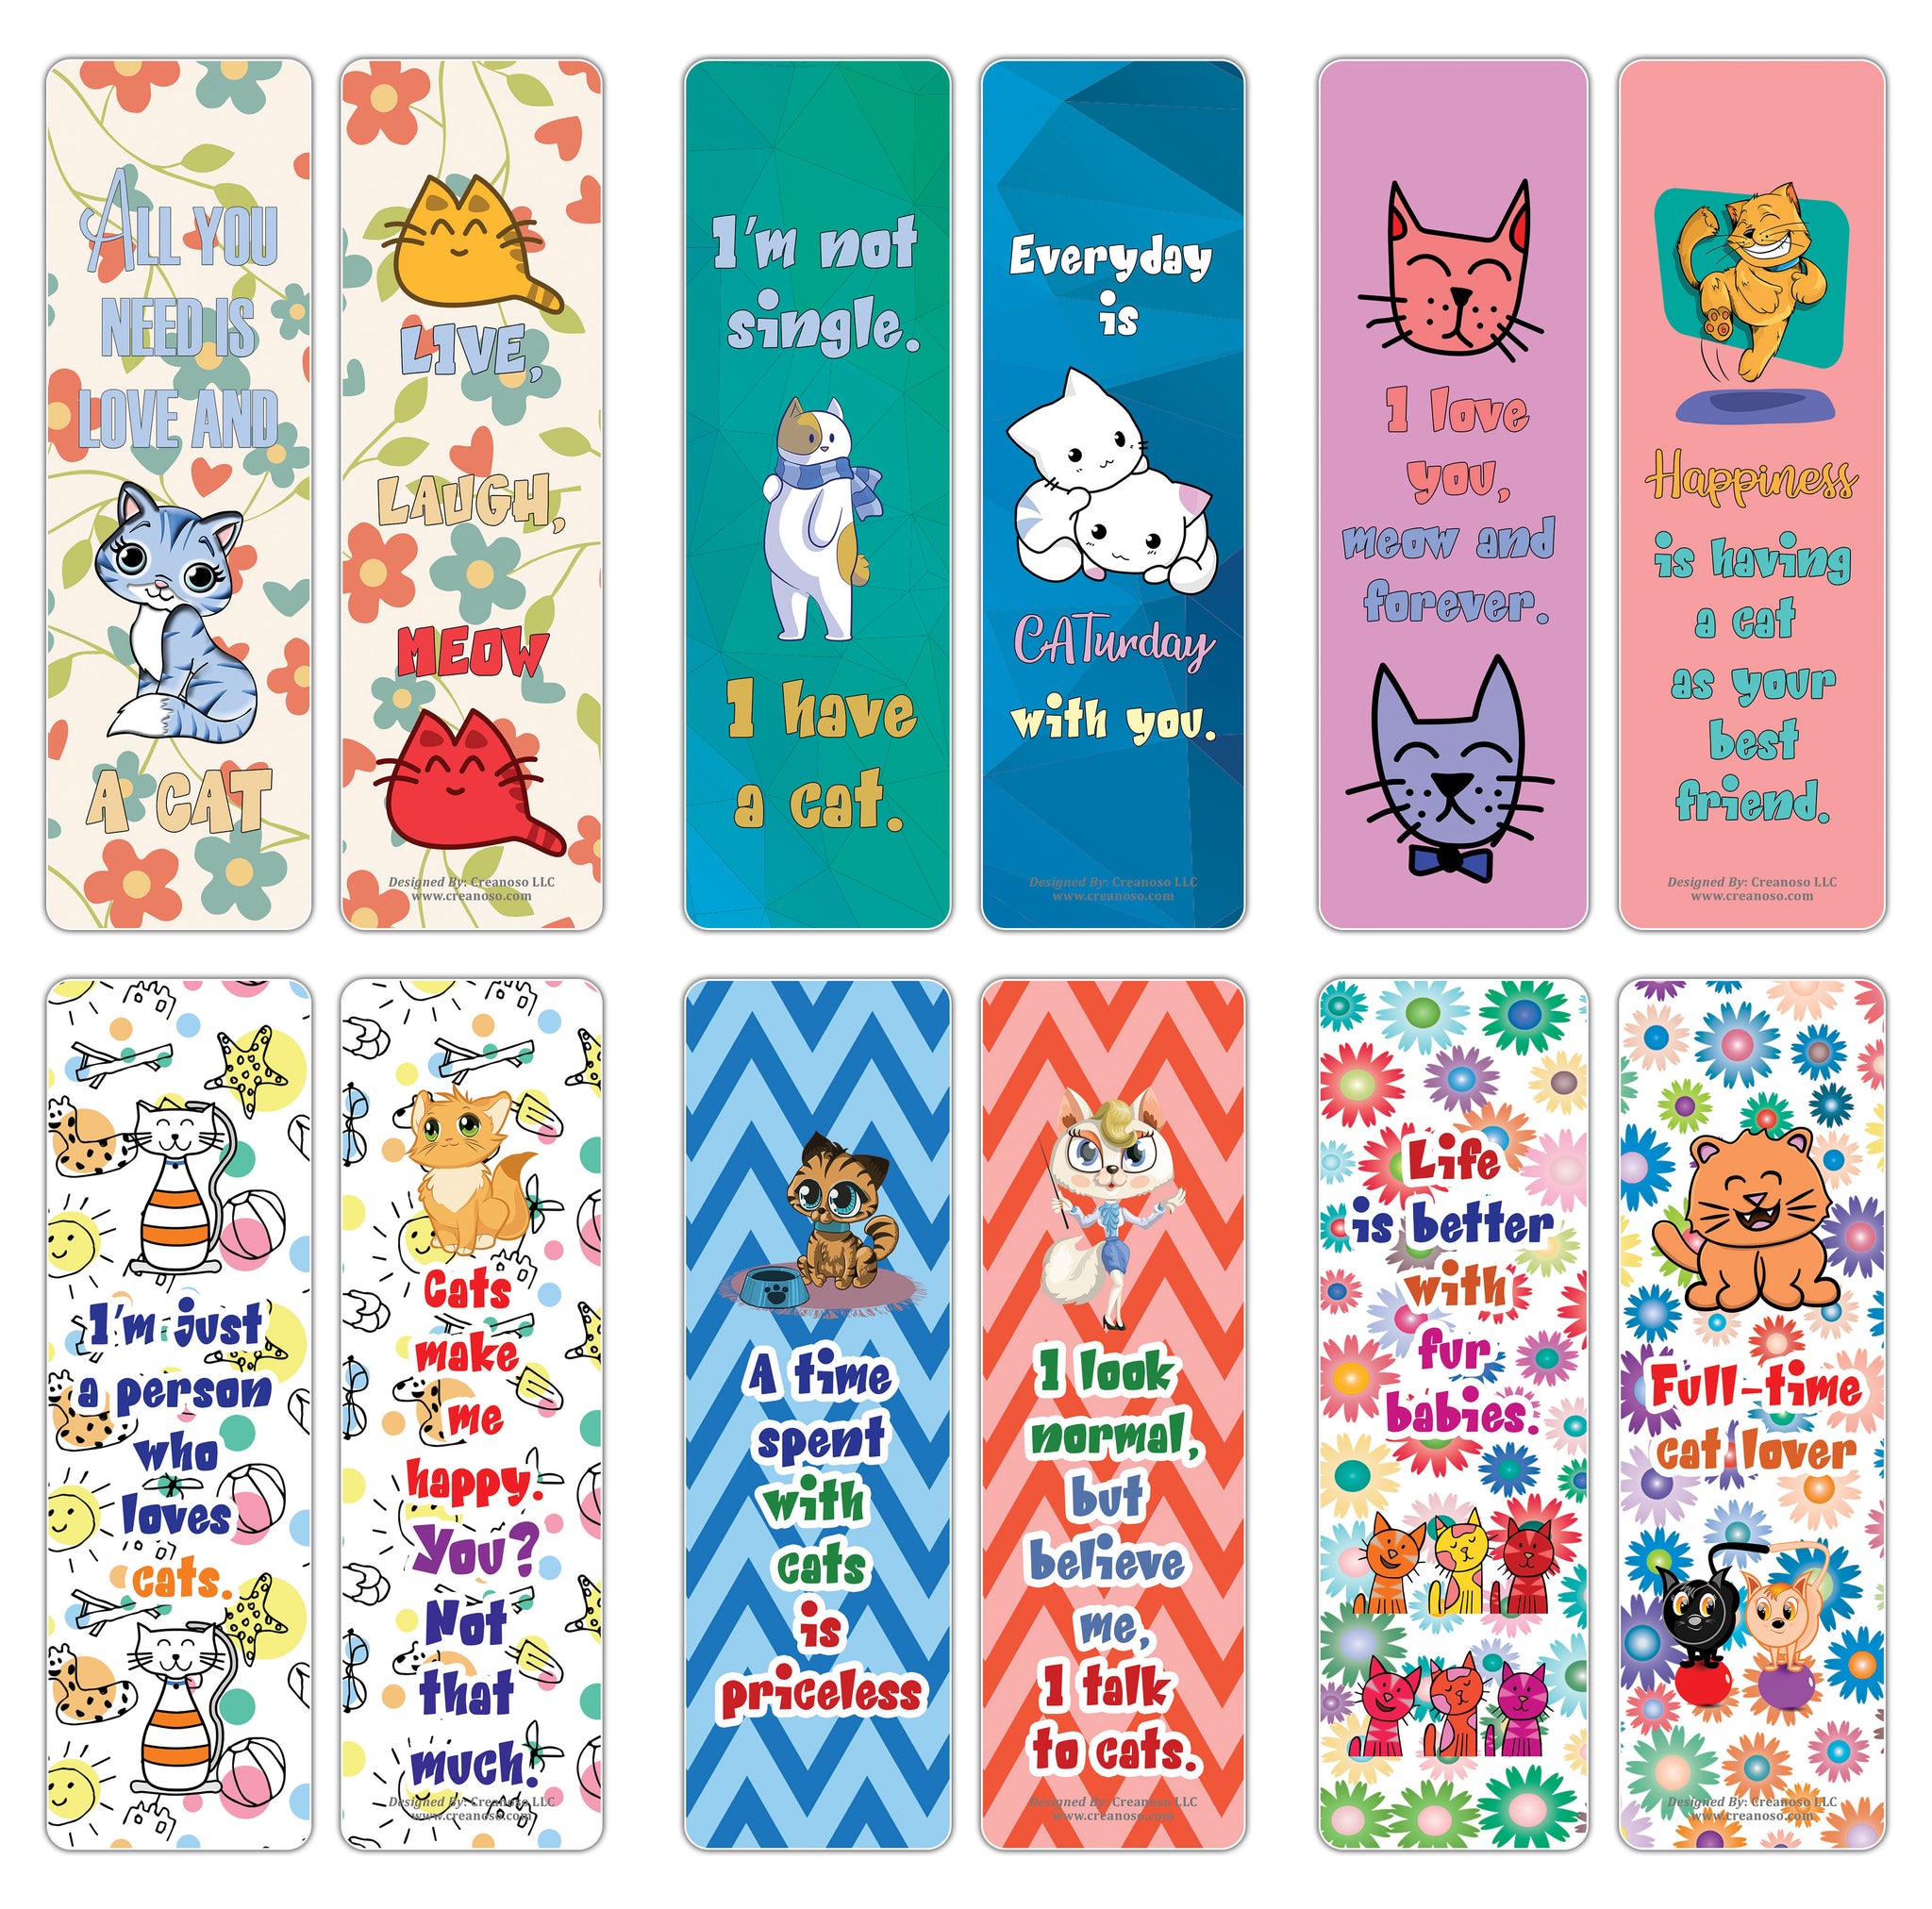 Creanoso Cats Enthusiasts Bookmarks (60-Pack) â€“ Great Party Favors Card Set â€“ Epic Collection Set Book Page Clippers â€“ Cool Gifts for Men, Women, Teens, Bookworms â€“ DIY Kit â€“ Teacher Rewards